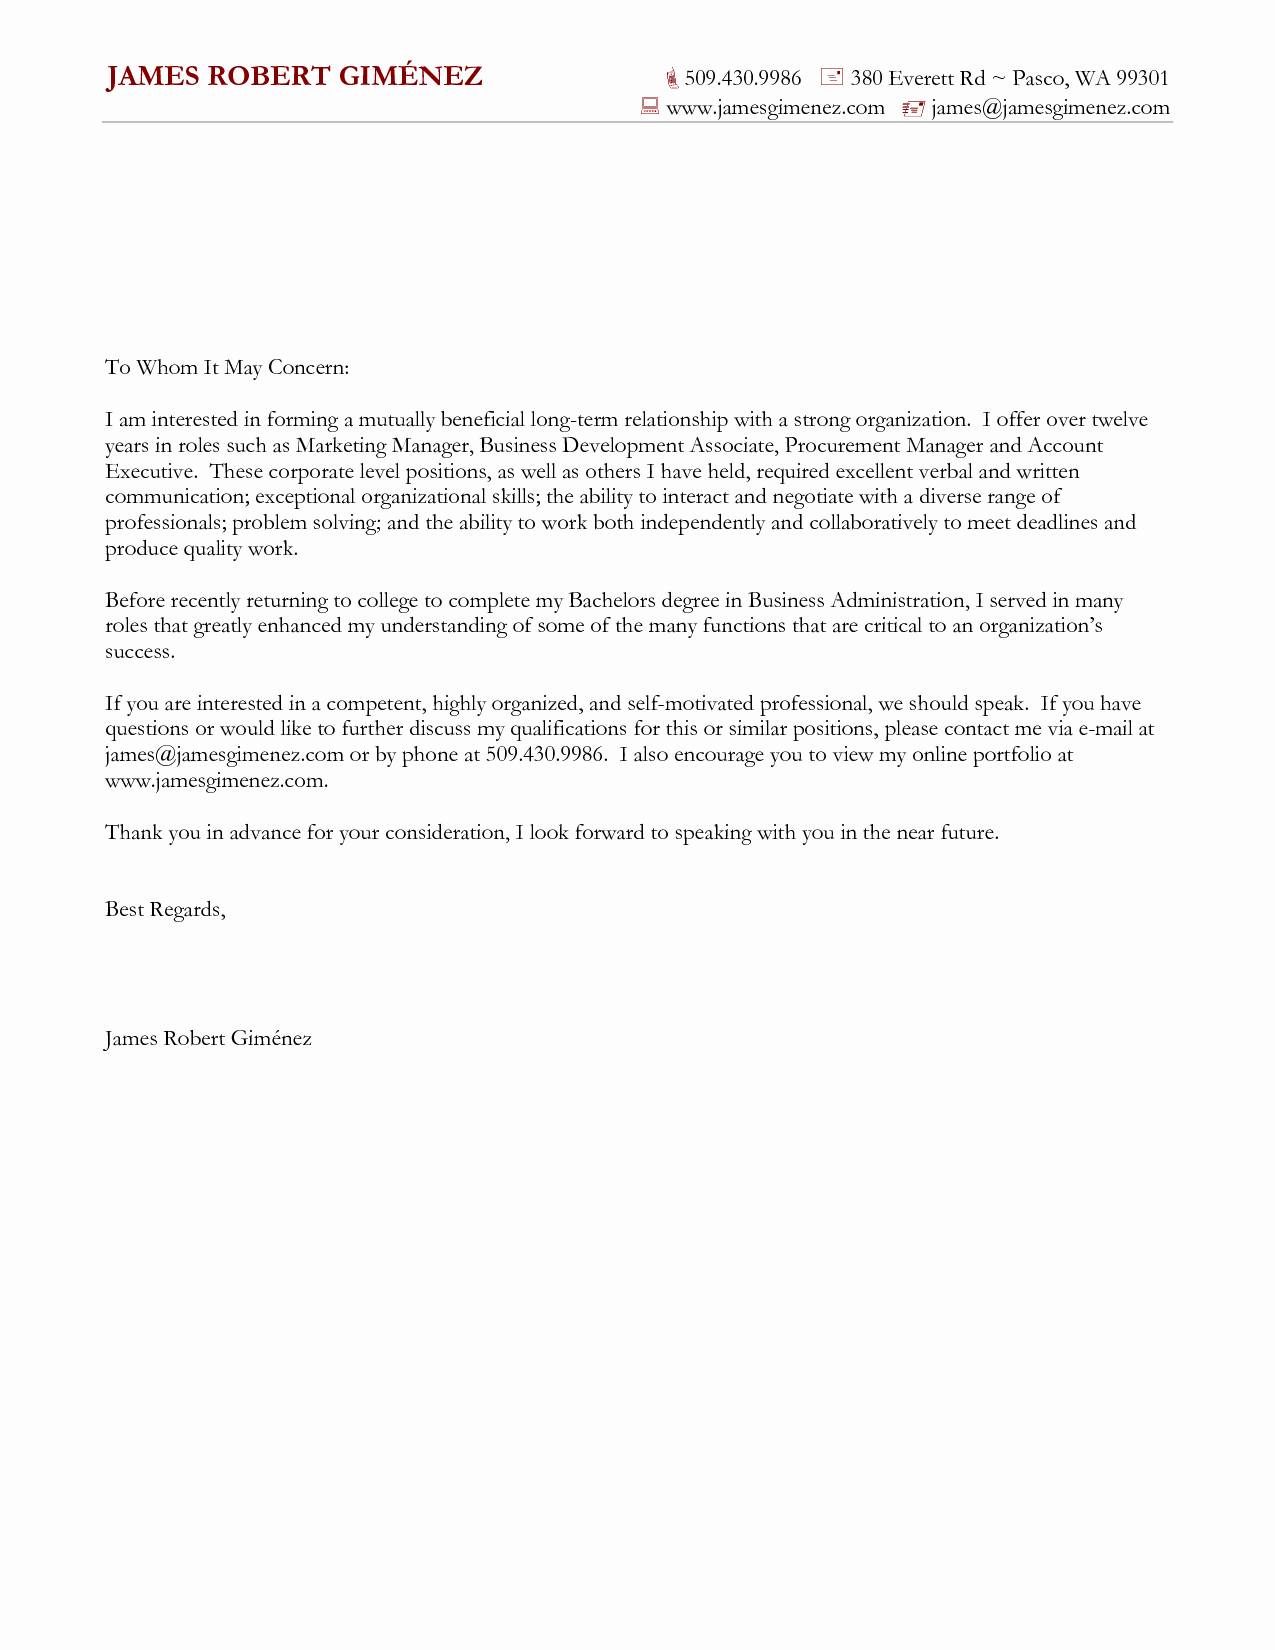 General Cover Letter Examples Beautiful Cover Letter for General Application Cover Letter